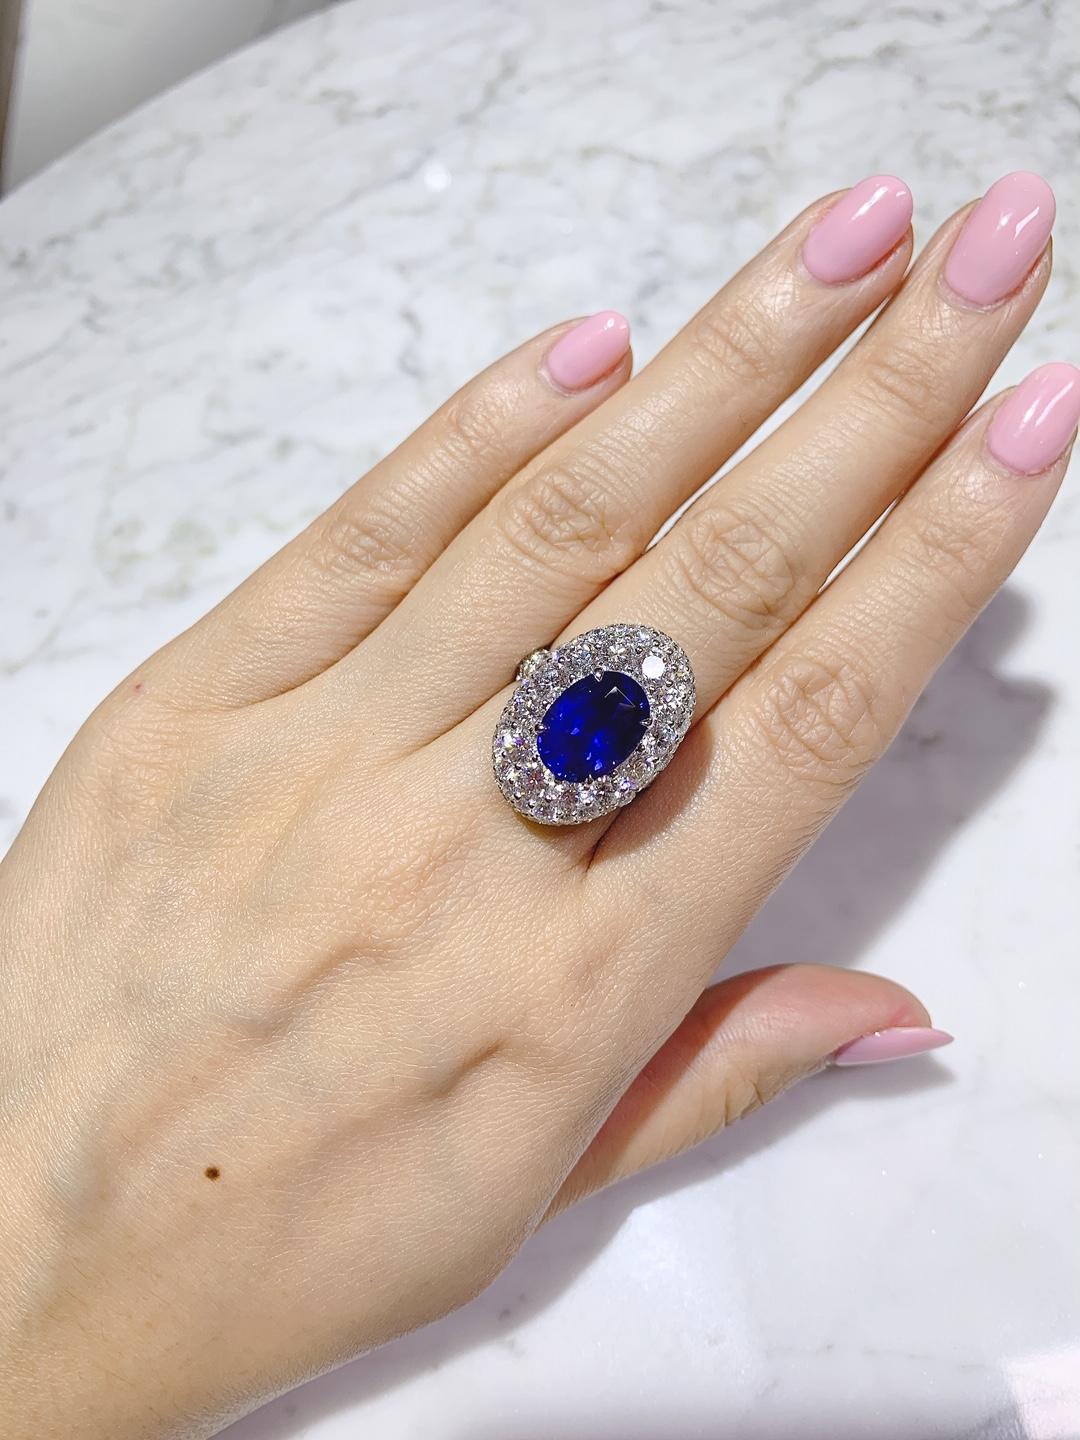 GRS Certified 6.24 Carat Ceylon Blue Sapphire Ring 'Heated' For Sale 4